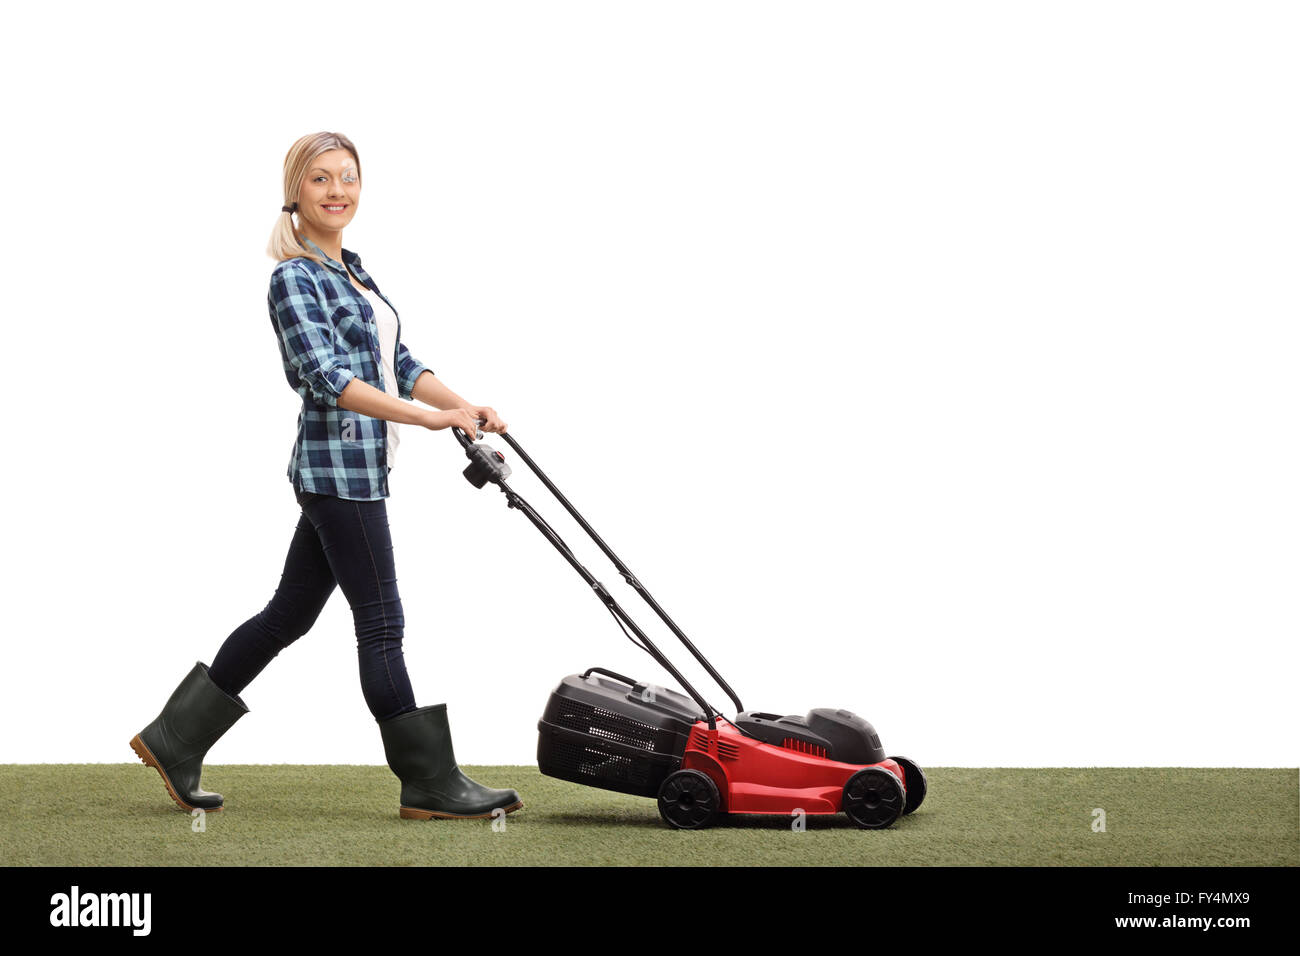 Young woman mowing a lawn with a lawnmower and looking at the camera isolated on white background Stock Photo